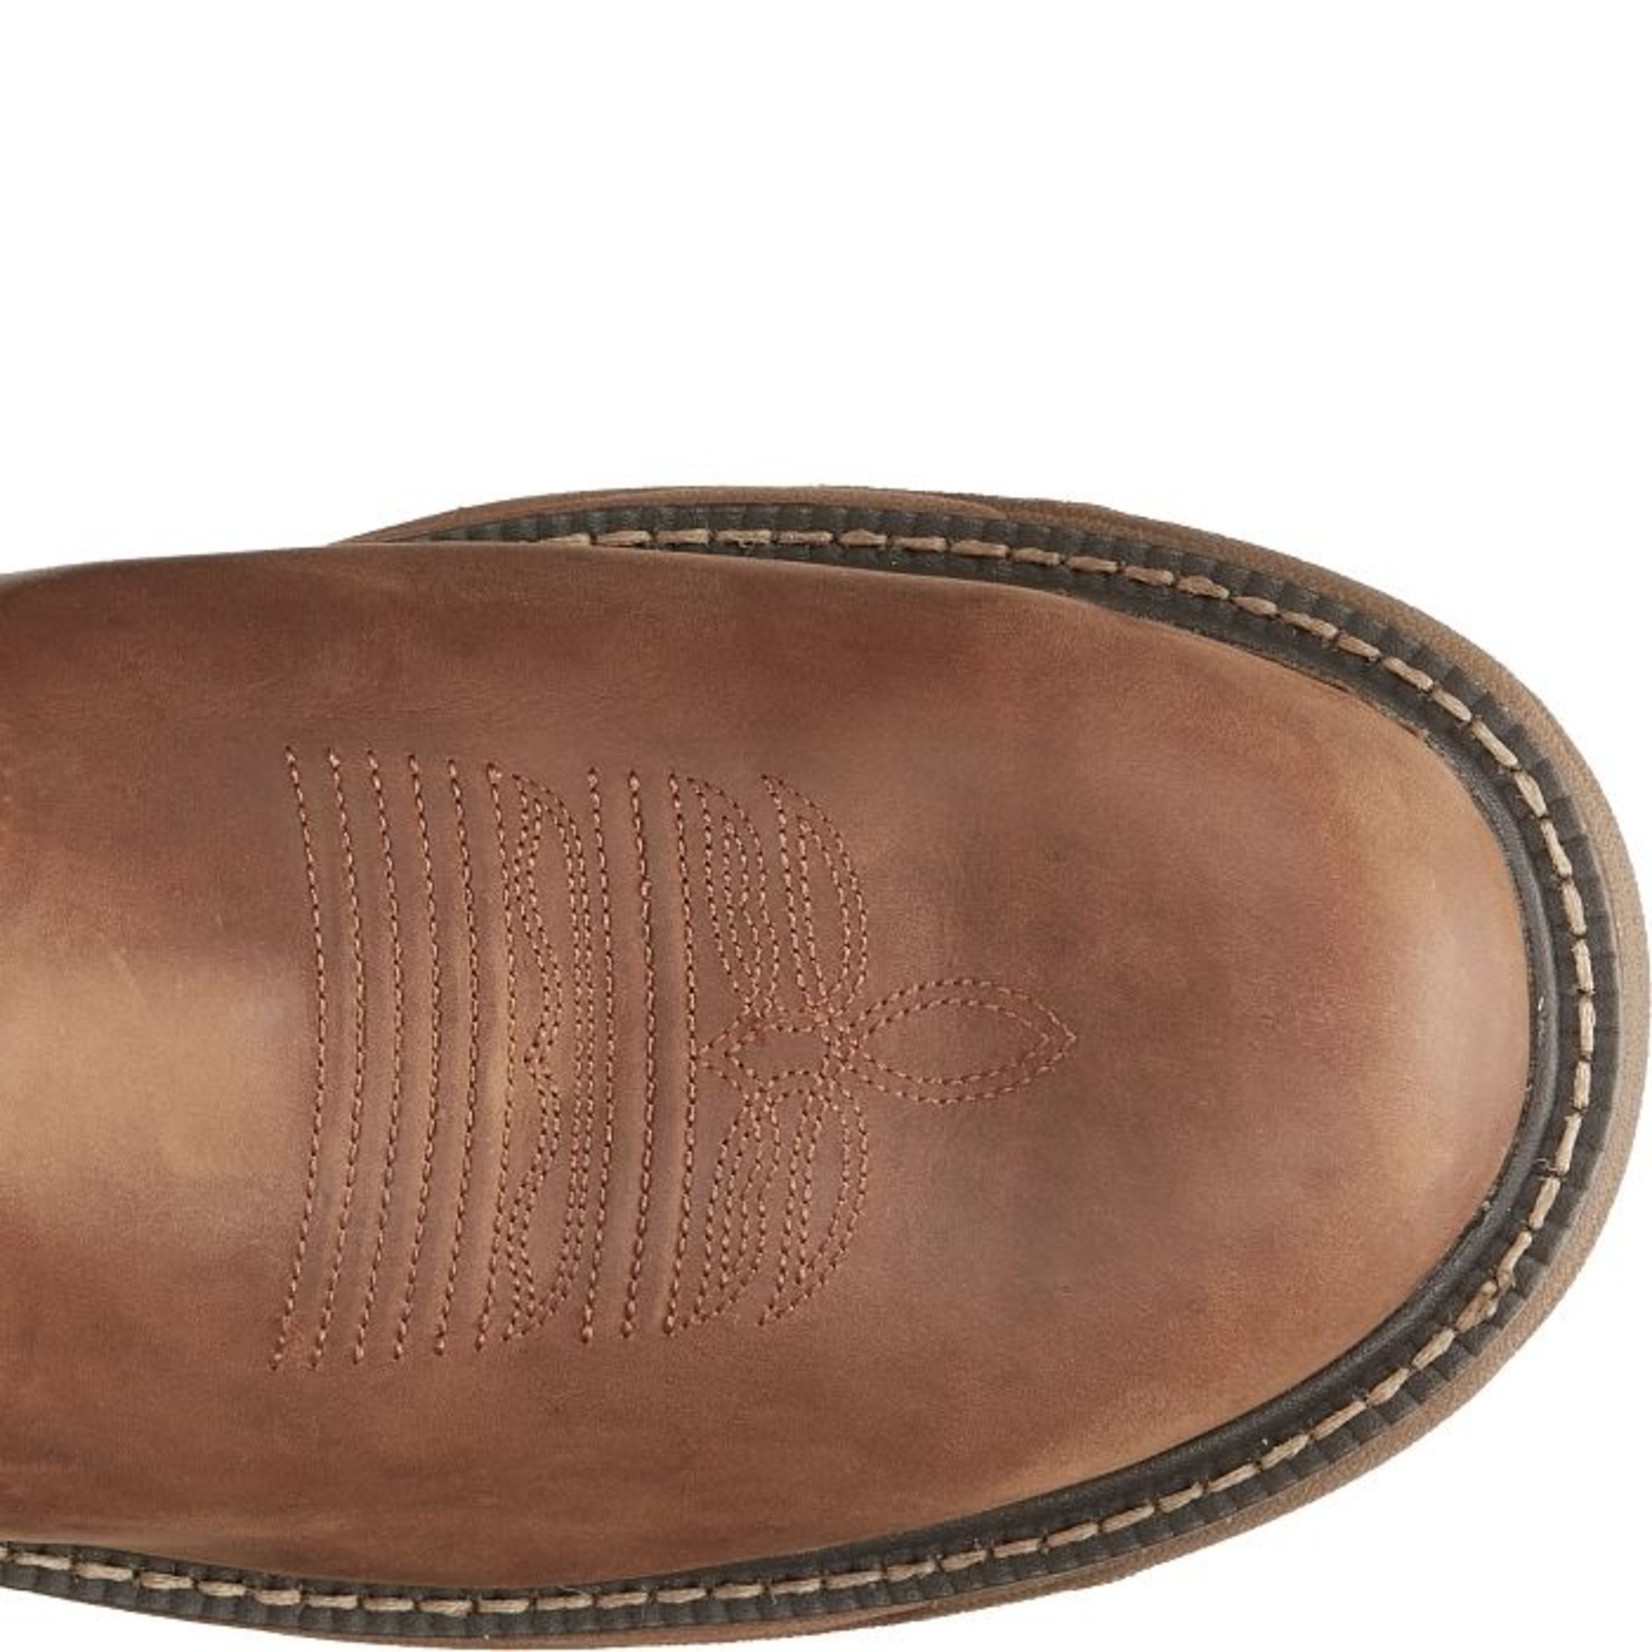 JUSTIN BOOTS 11" RUSH ROUND TOE WP EH